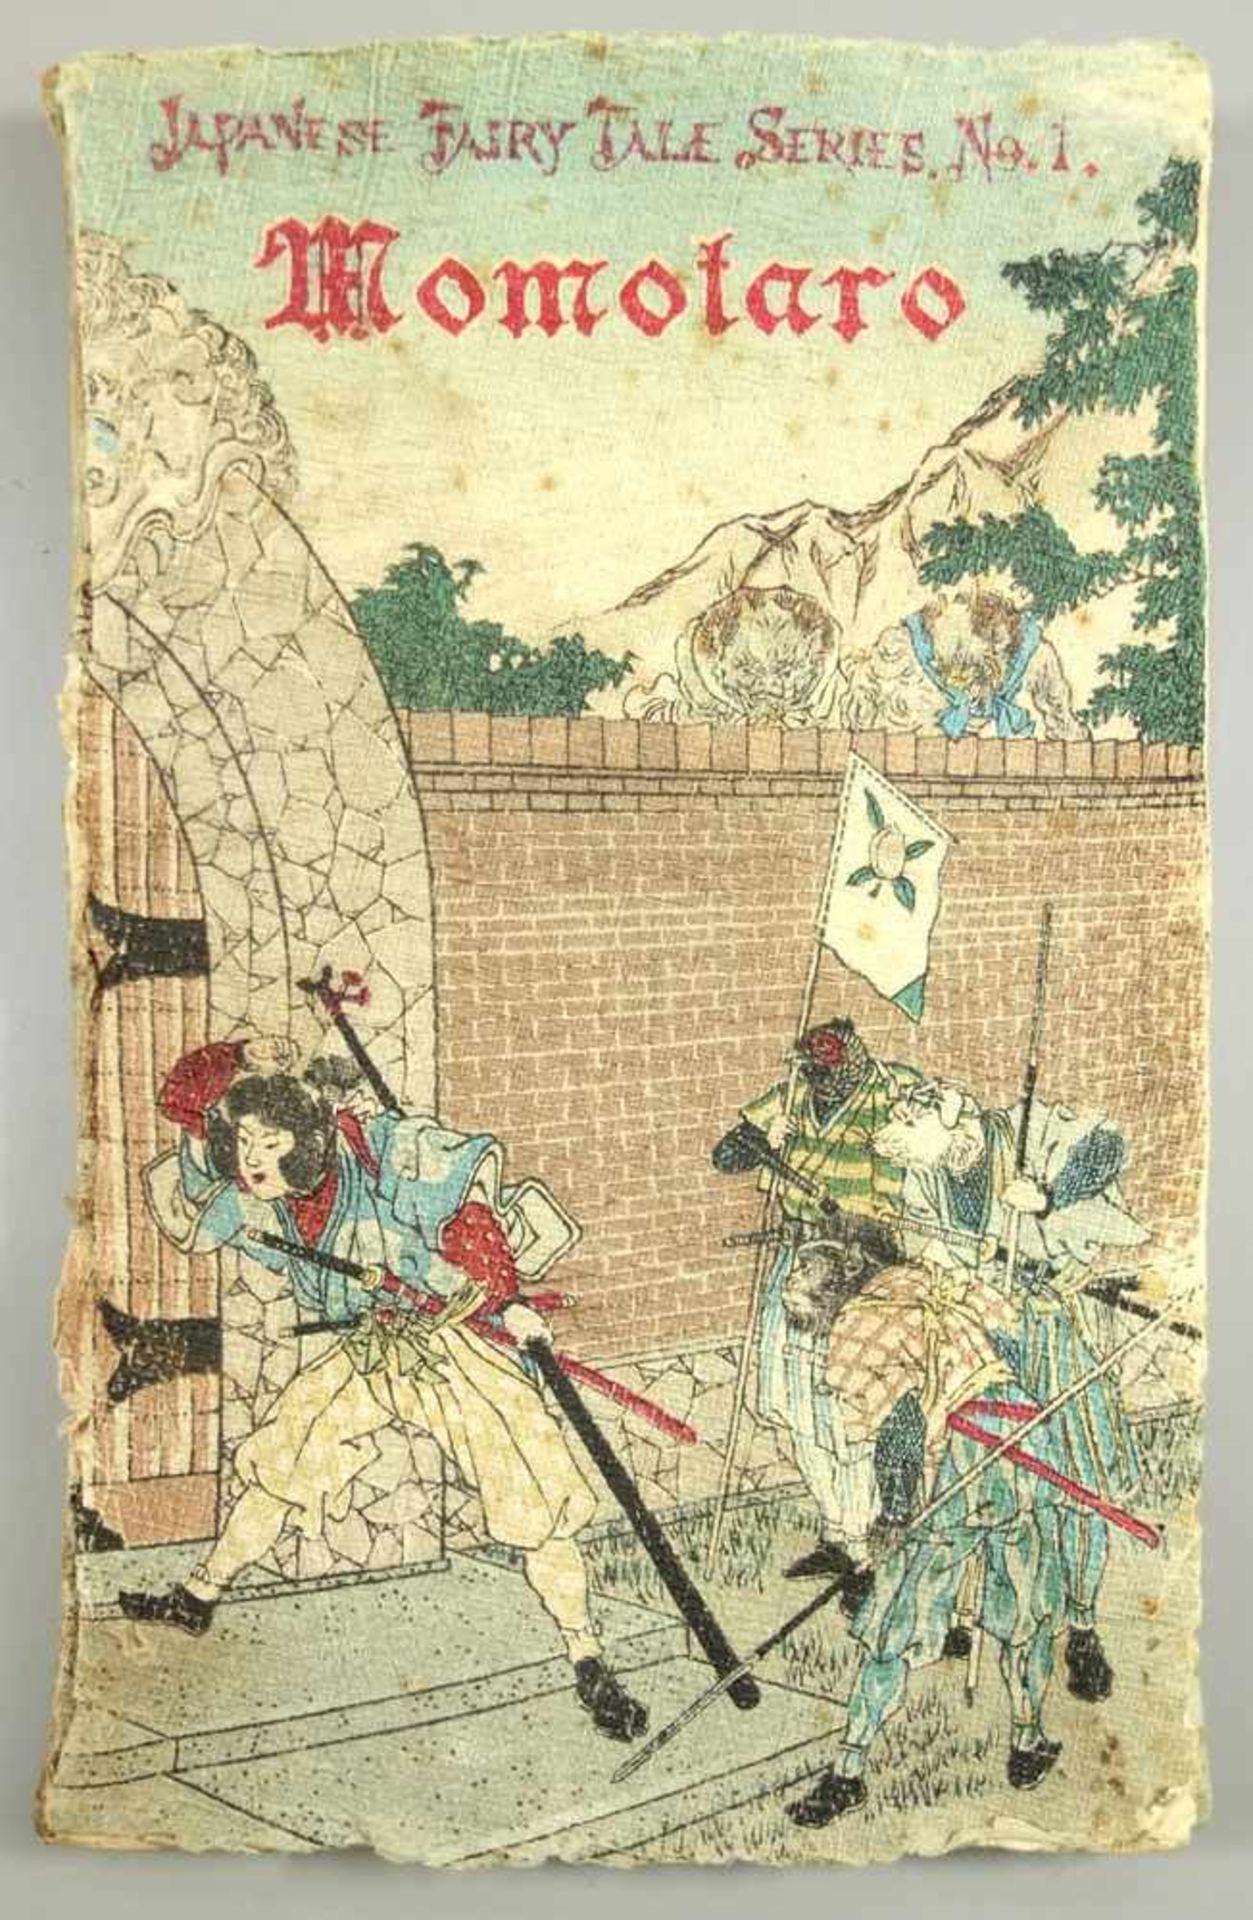 Book Published by T. Hasegawa "Momotaro",Japanese Fairy Tale Series, No.1, Second Edition, Tokyo (